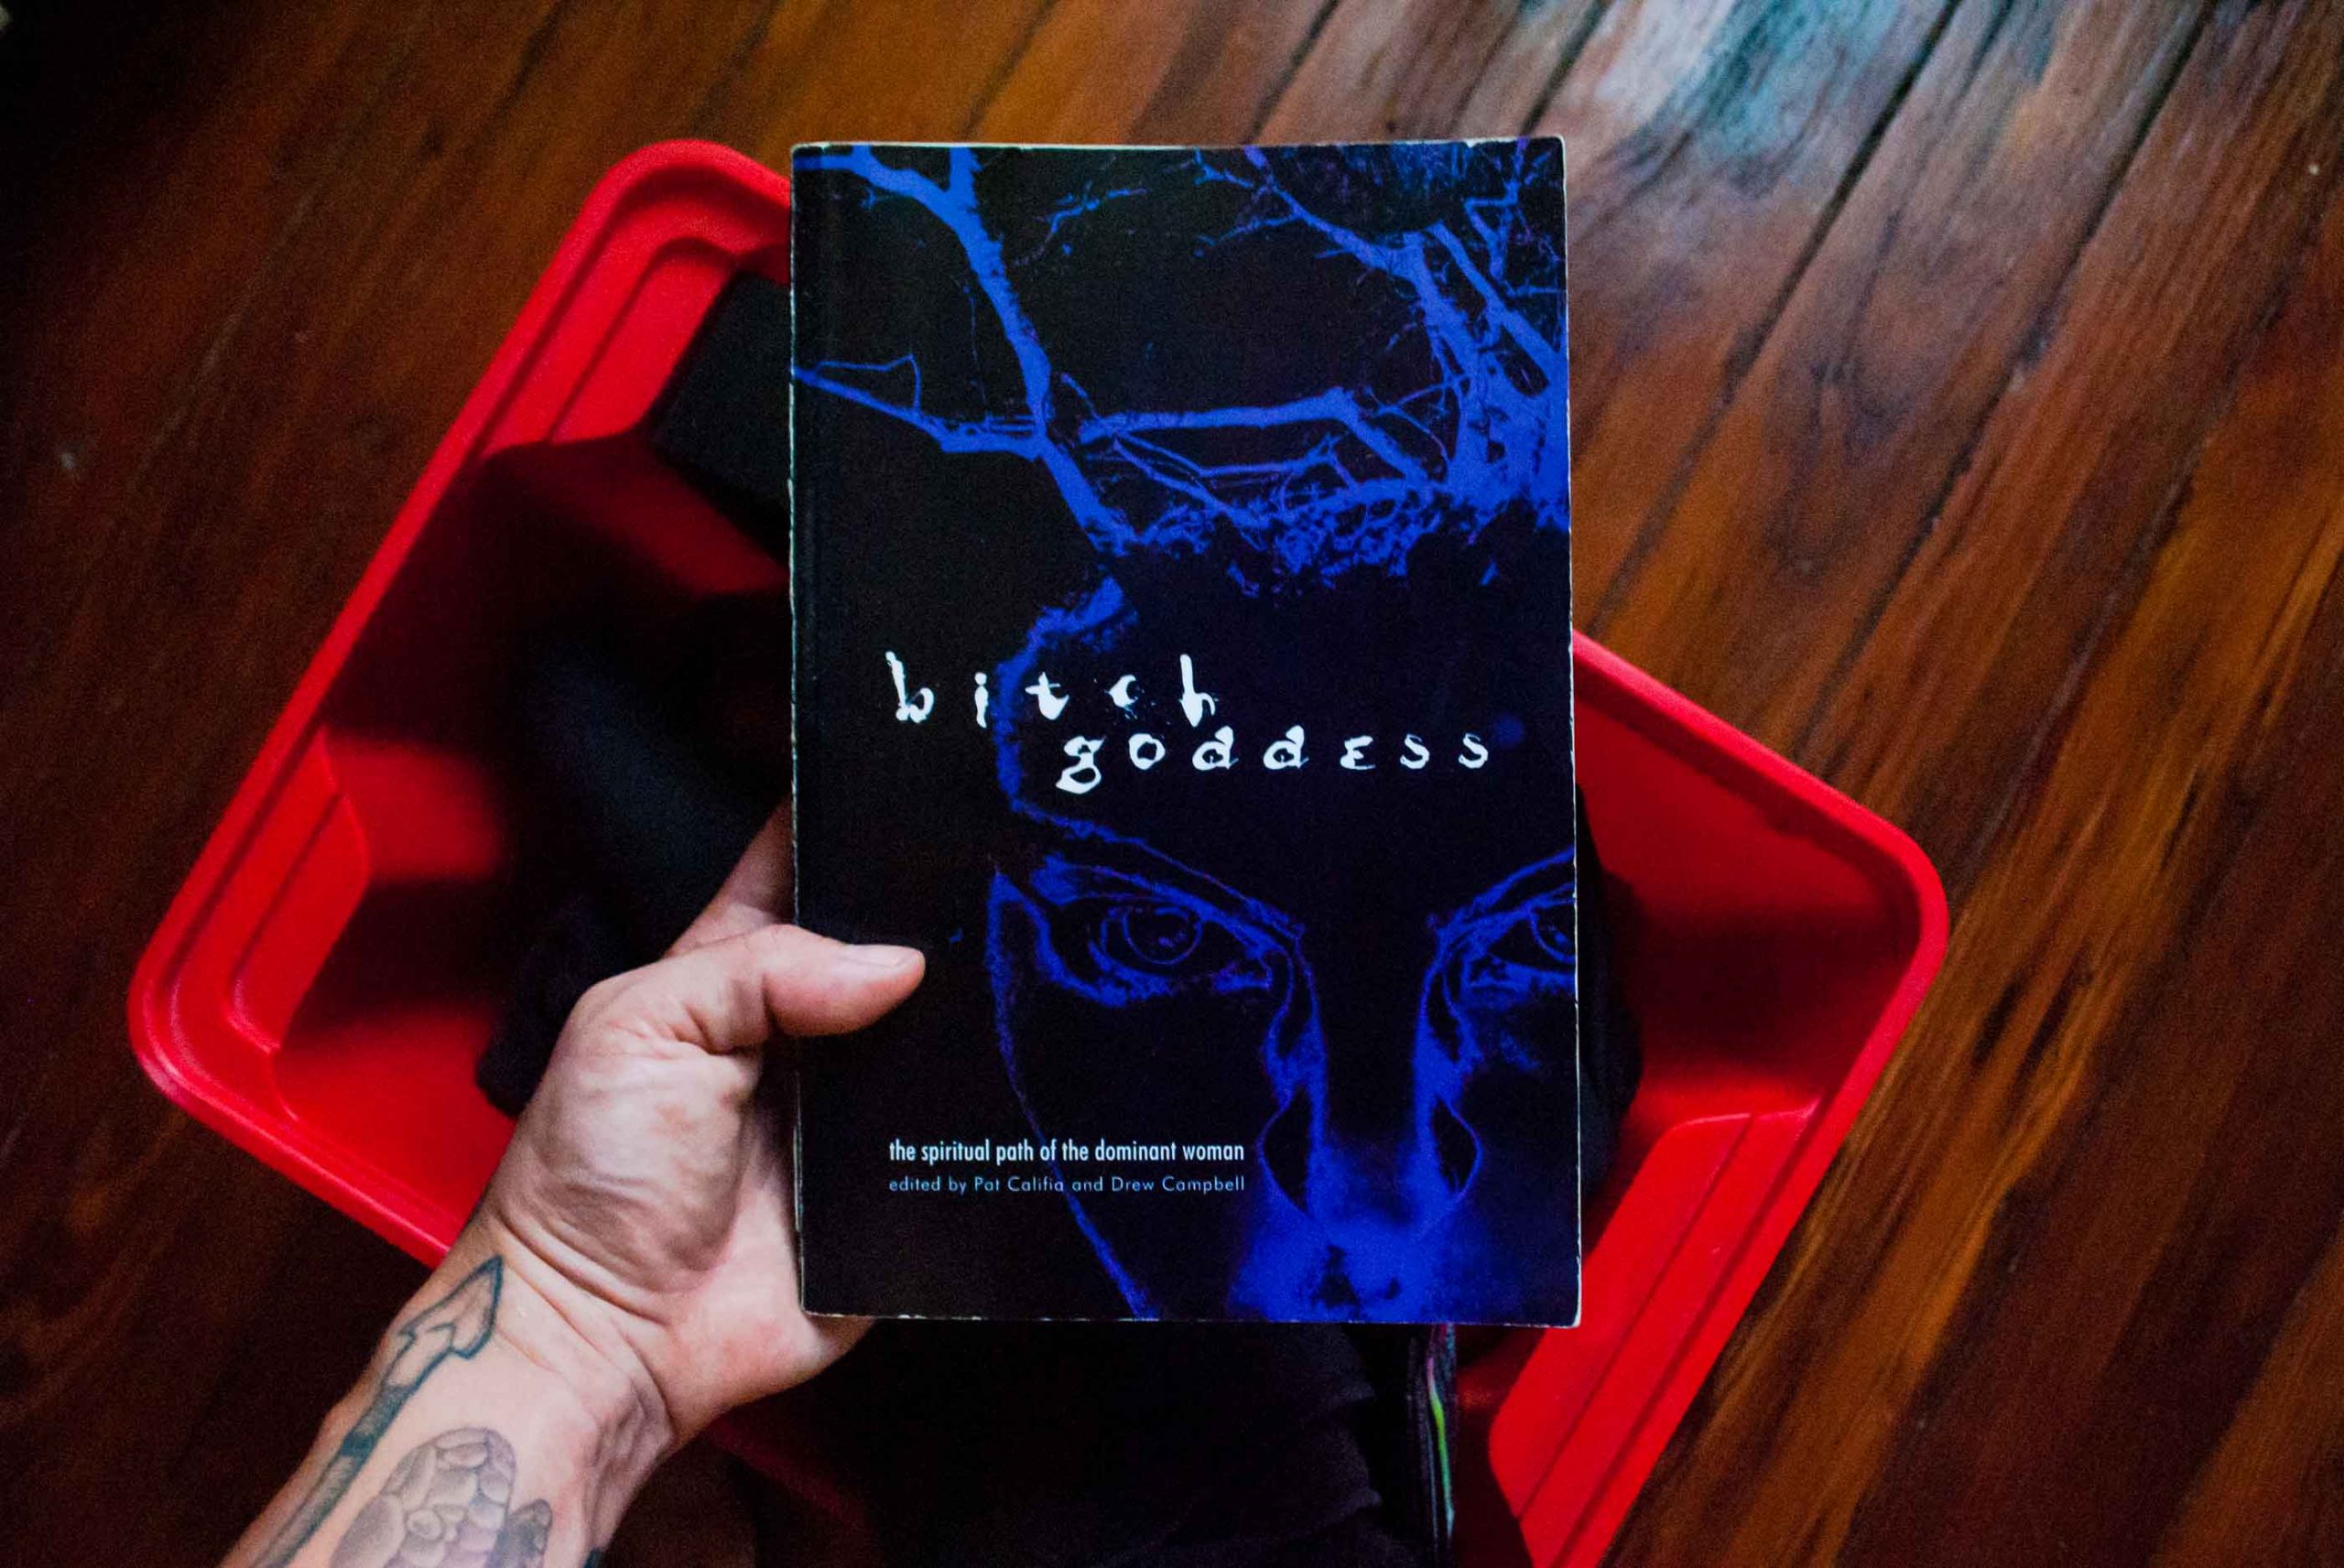 Monk Reviews Bitch Goddess edited by Patrick Califia and Drew Campbell